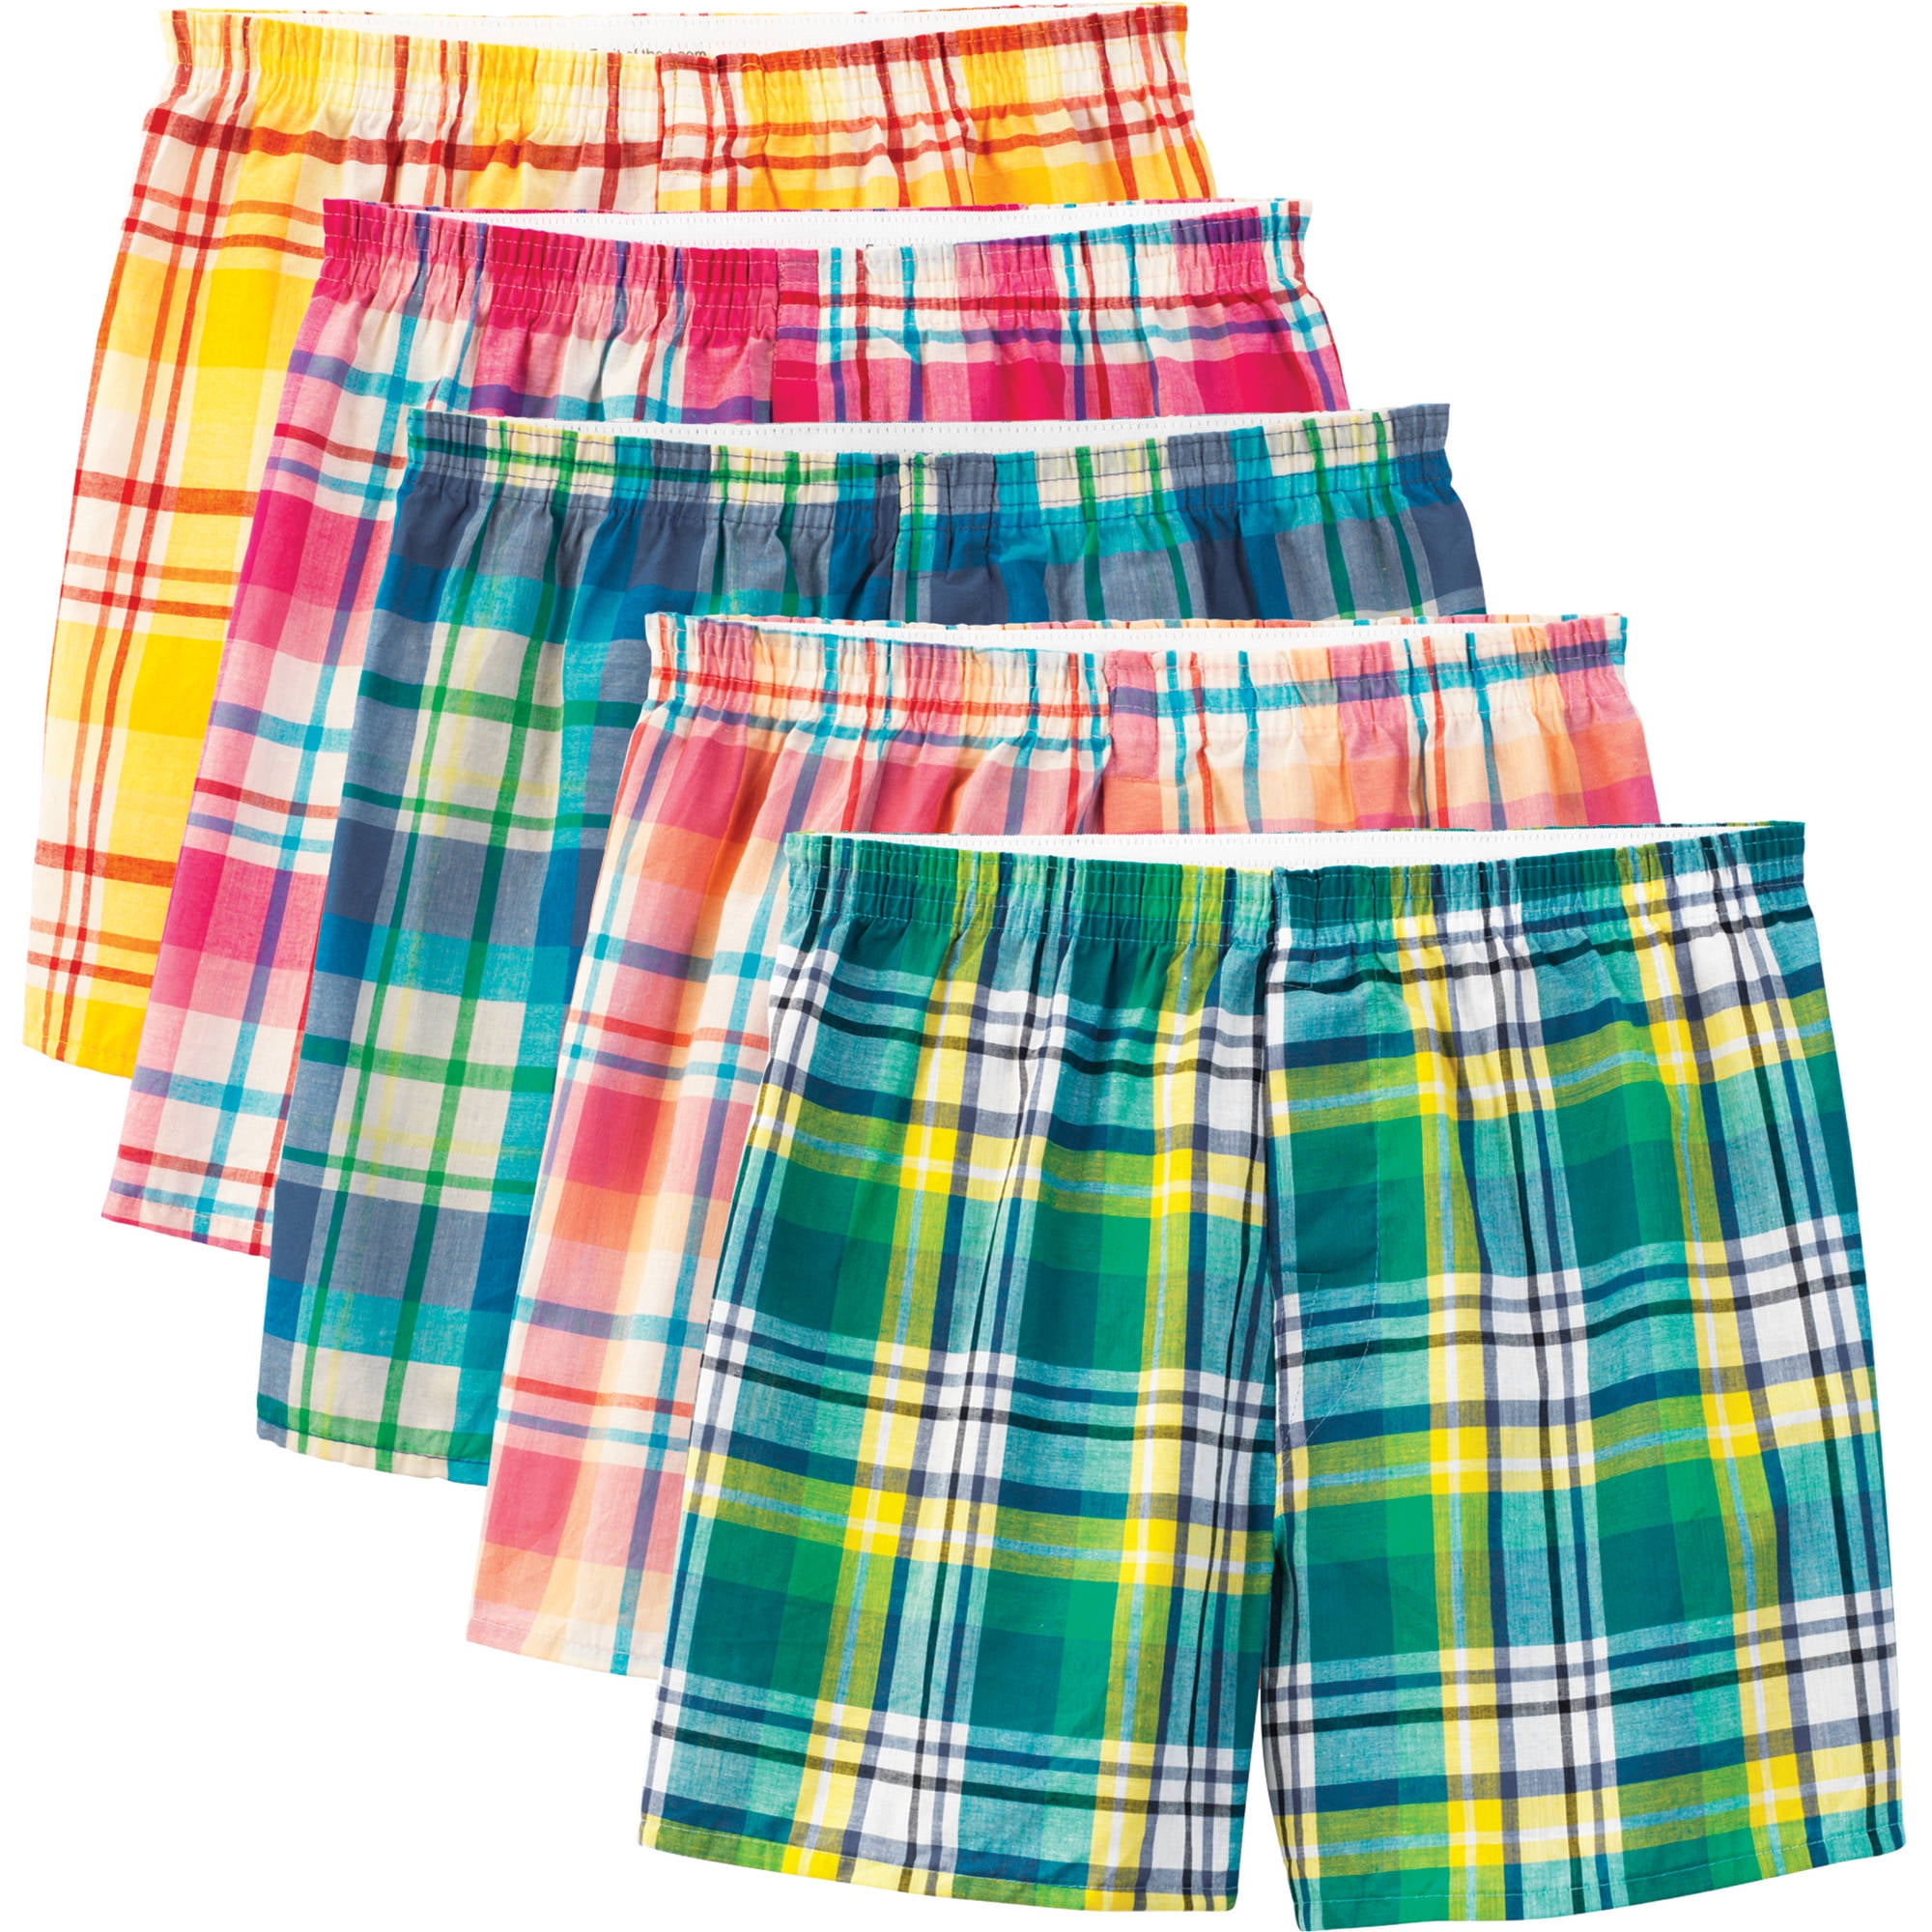 Details about   3 THREE 5 Pack Fruit of the Loom Plaid Boxers Tag Free Boys L 14-16 New